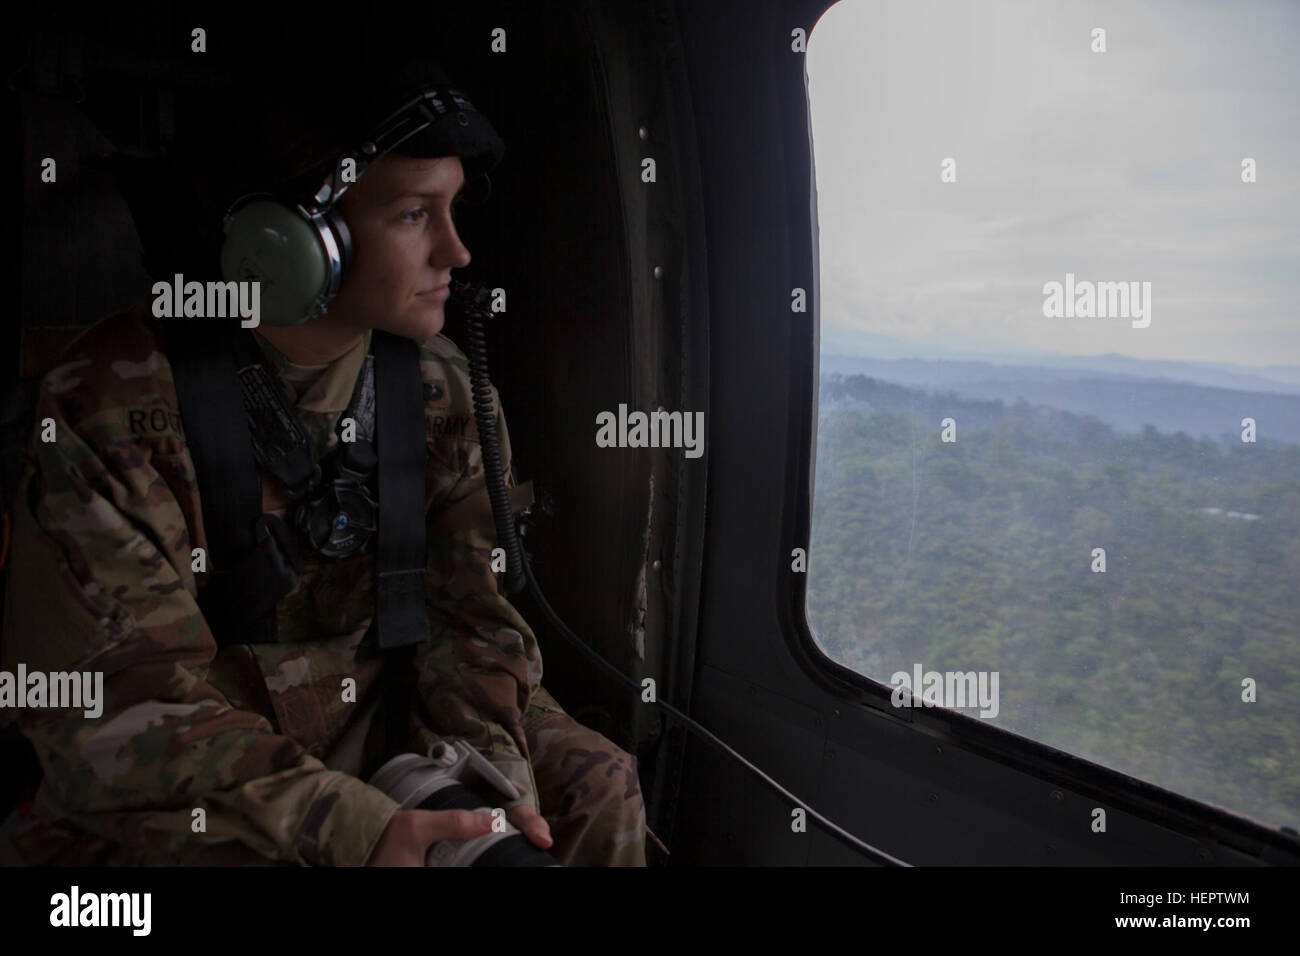 U.S. Army Spc. Kristen Root of the 982nd Combat Camera unit (Airborne), East Point, Georgia analyzes out of the window of a UH-60 Black Hawk helicopter to decide her next shot she will take with her camera in San Marcos, Guatemala, May 27, 2016.  Task Force Red Wolf and Army South conducts Humanitarian Civil Assistance Training to include tactical level construction projects and Medical Readiness Training Exercises providing medical access and building schools in Guatemala with the Guatemalan Government and non-government agencies from 05MAR16 to 18JUN16 in order to improve the mission readine Stock Photo